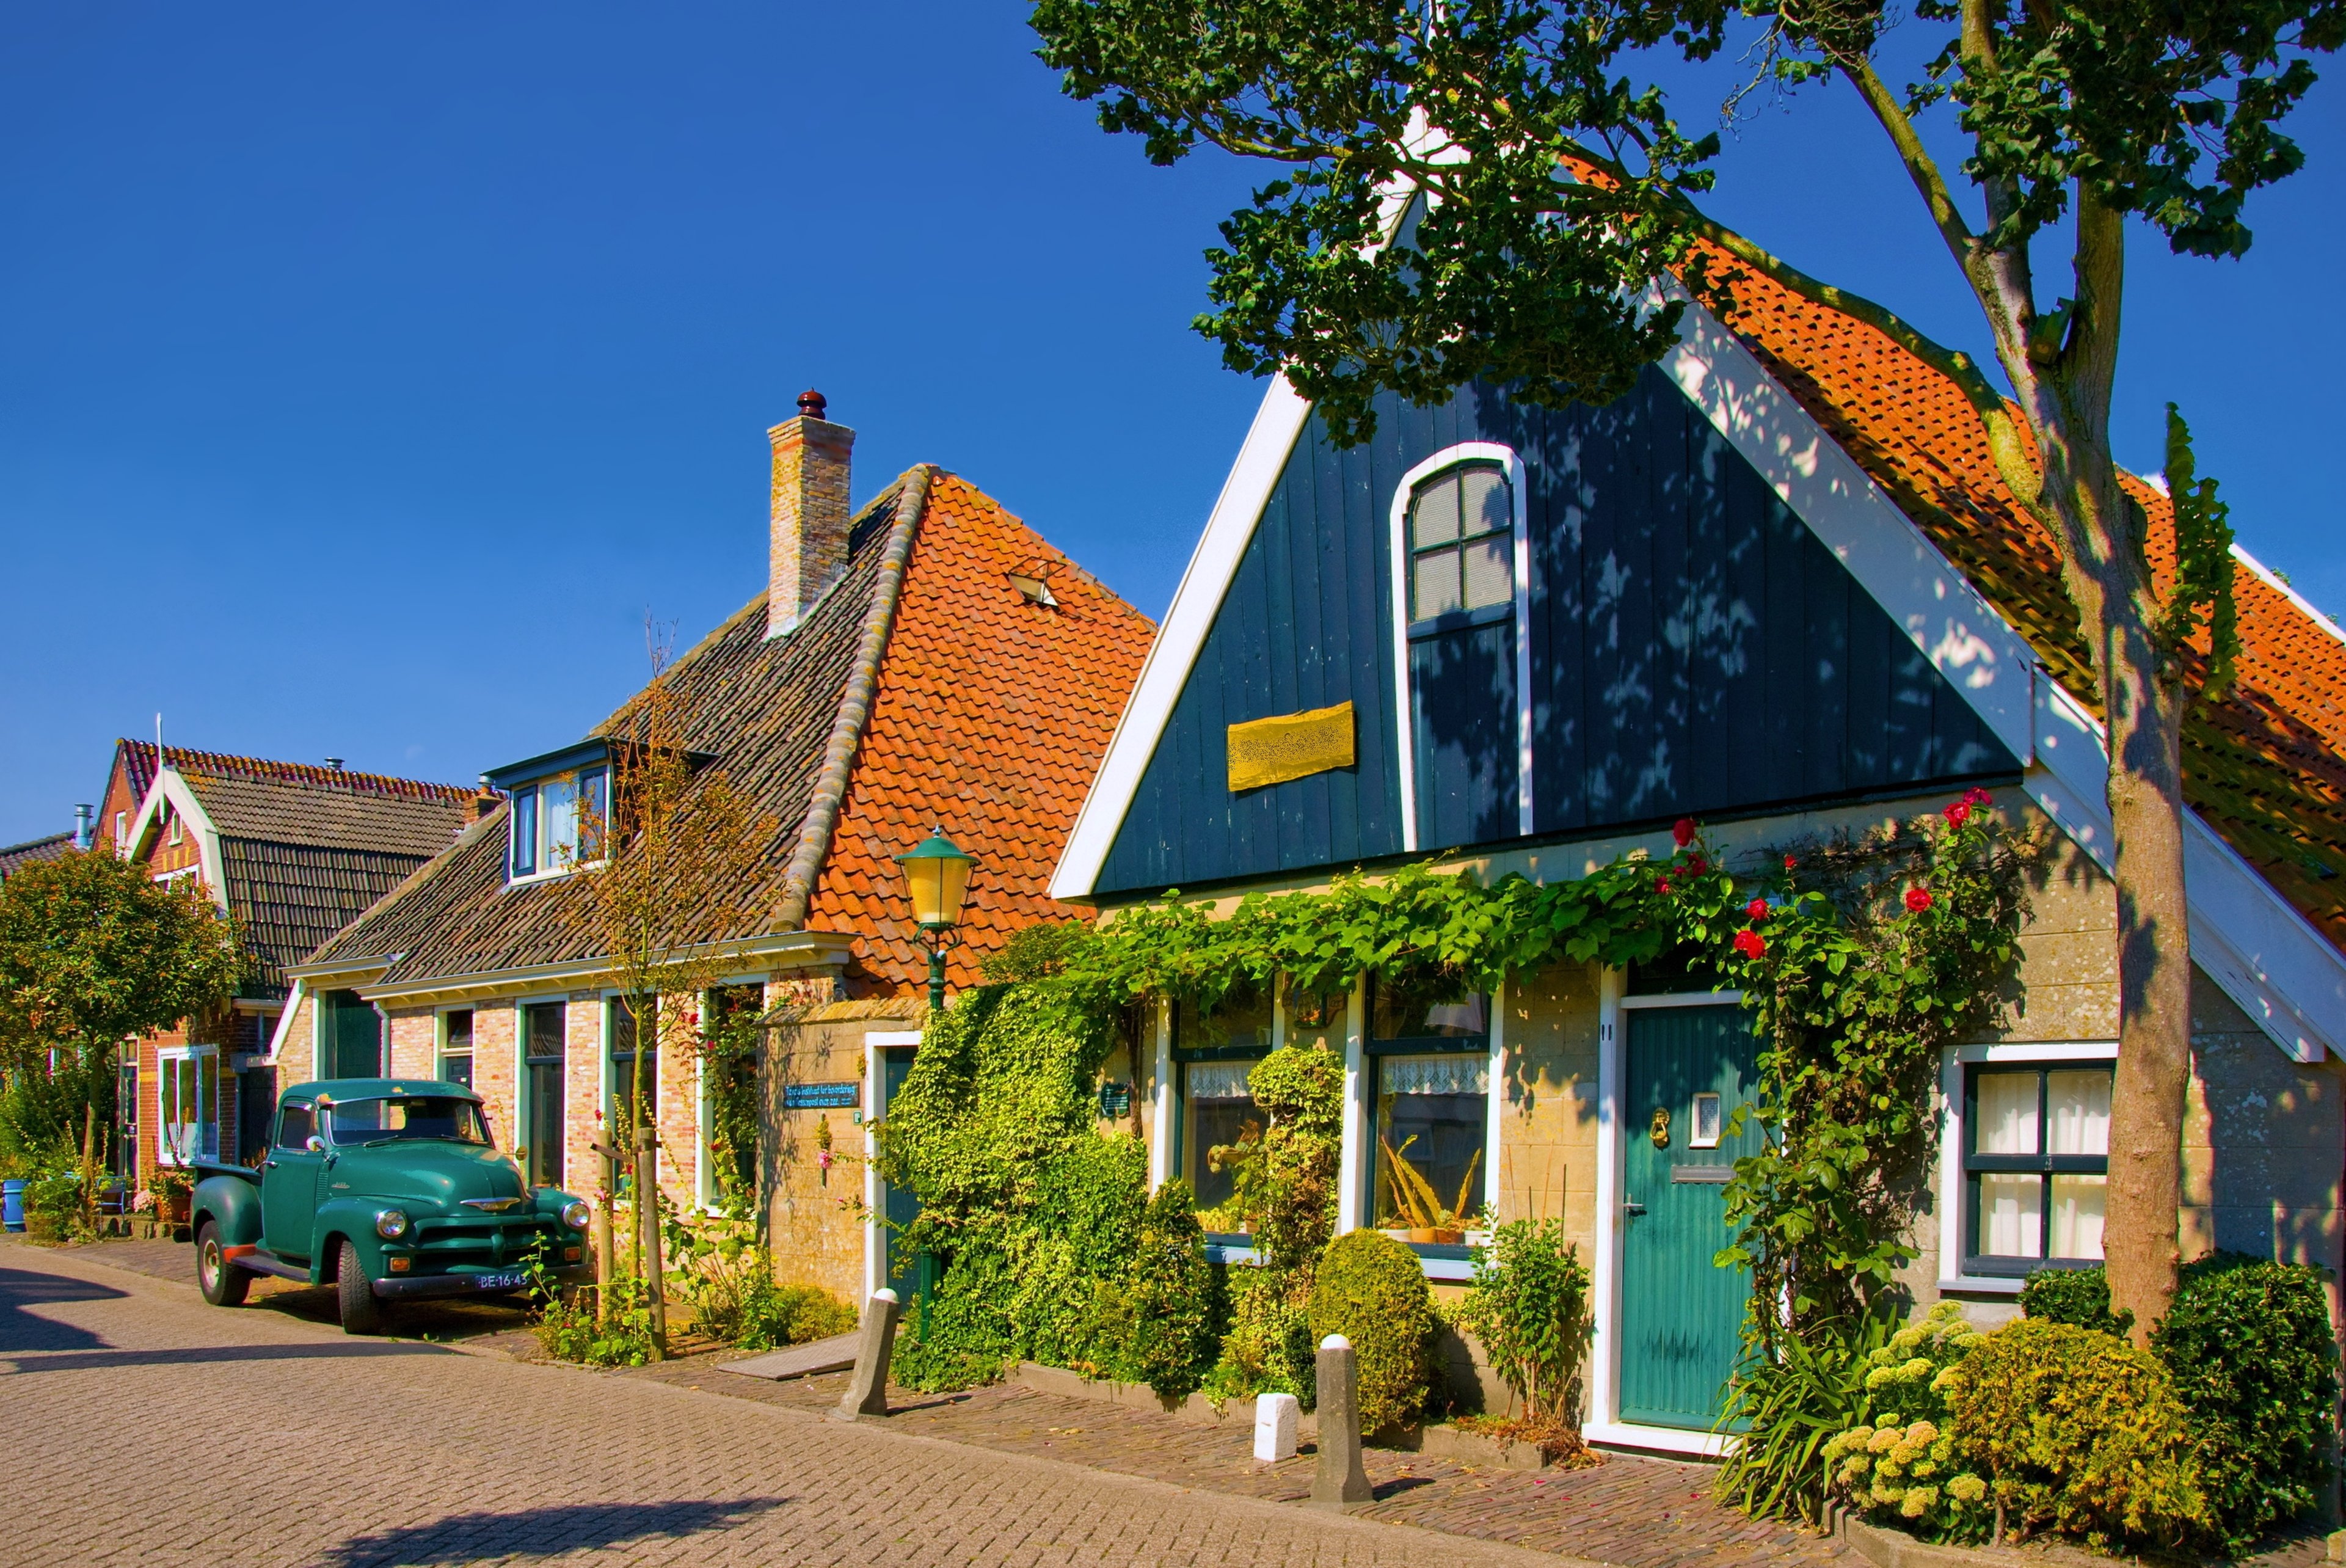 nederland, Country, City, Town, Buildings, Cars, Plants, Houses, Streets, Sky, Sunny, Blue, Deutschland Wallpaper